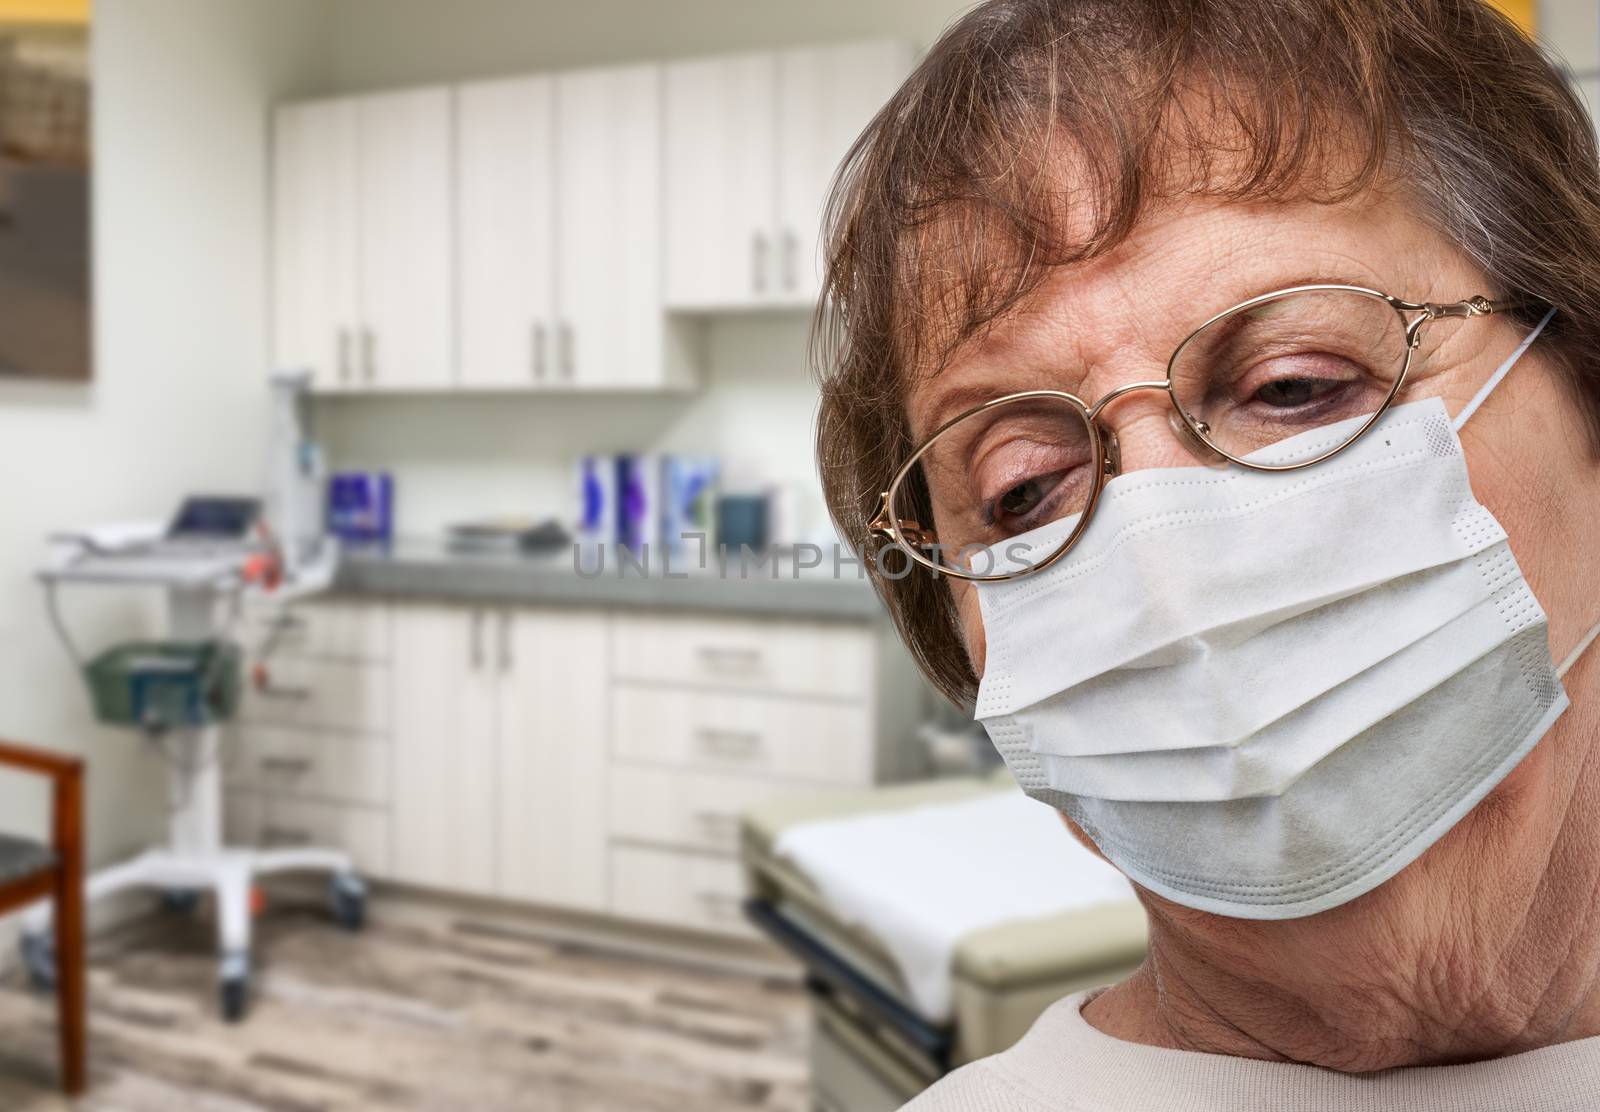 Concerned Senior Adult Woman Wearing Medical Face Mask Waiting In Doctor Office.